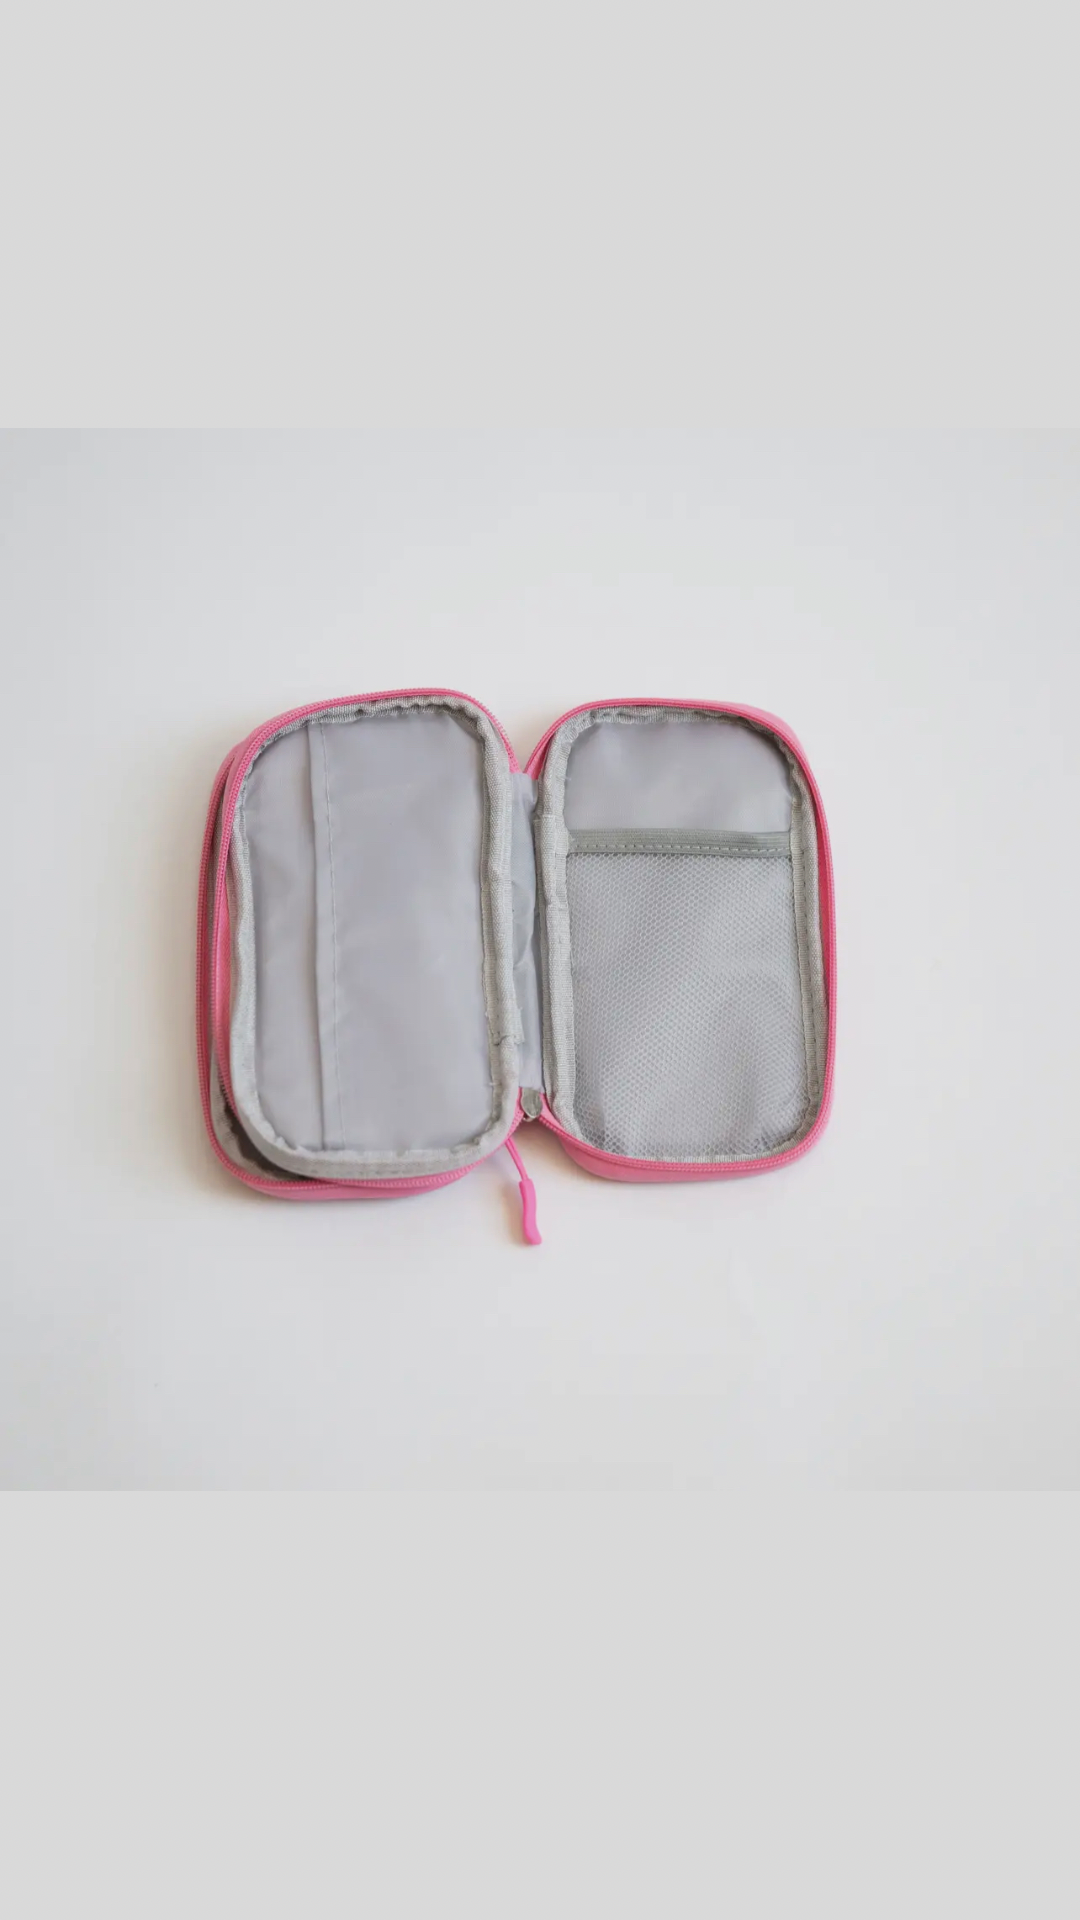 Travel Cord Organizer Pouch - Twice the Charm